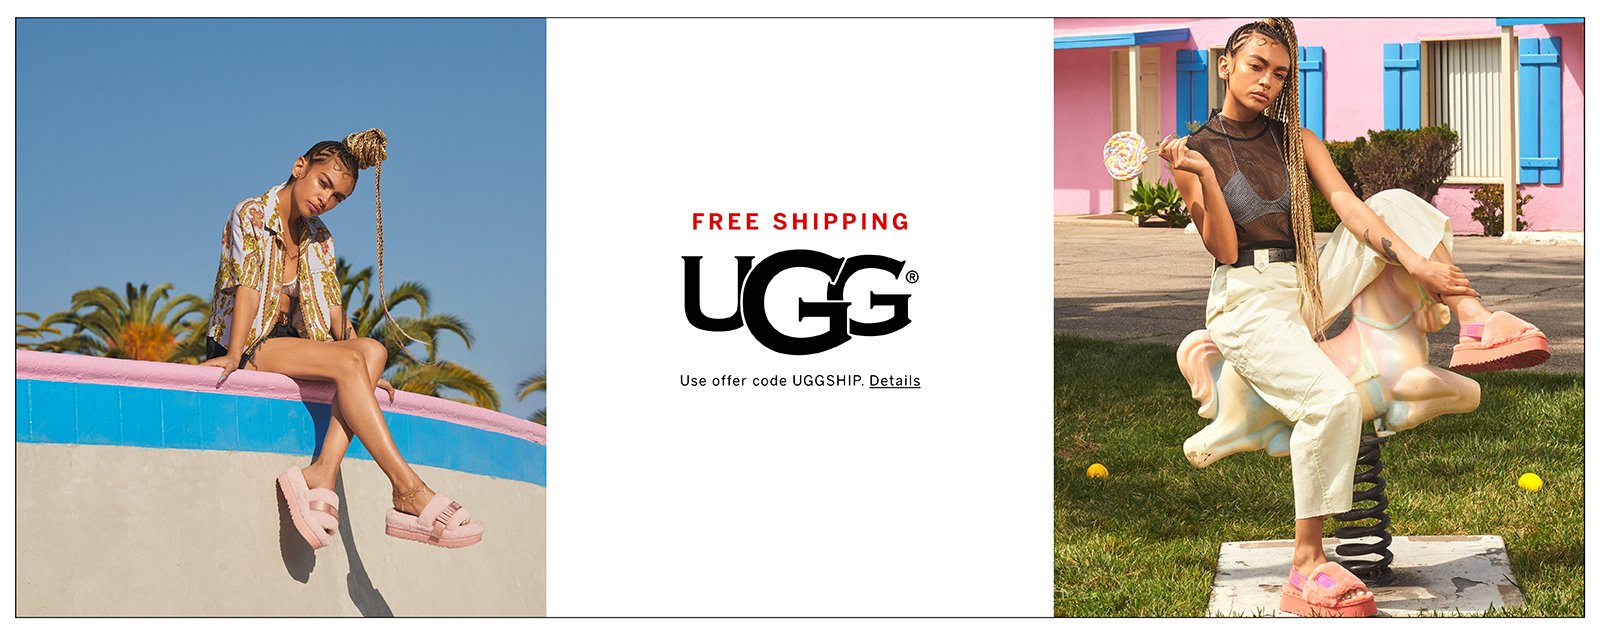 does victoria's secret sell authentic uggs